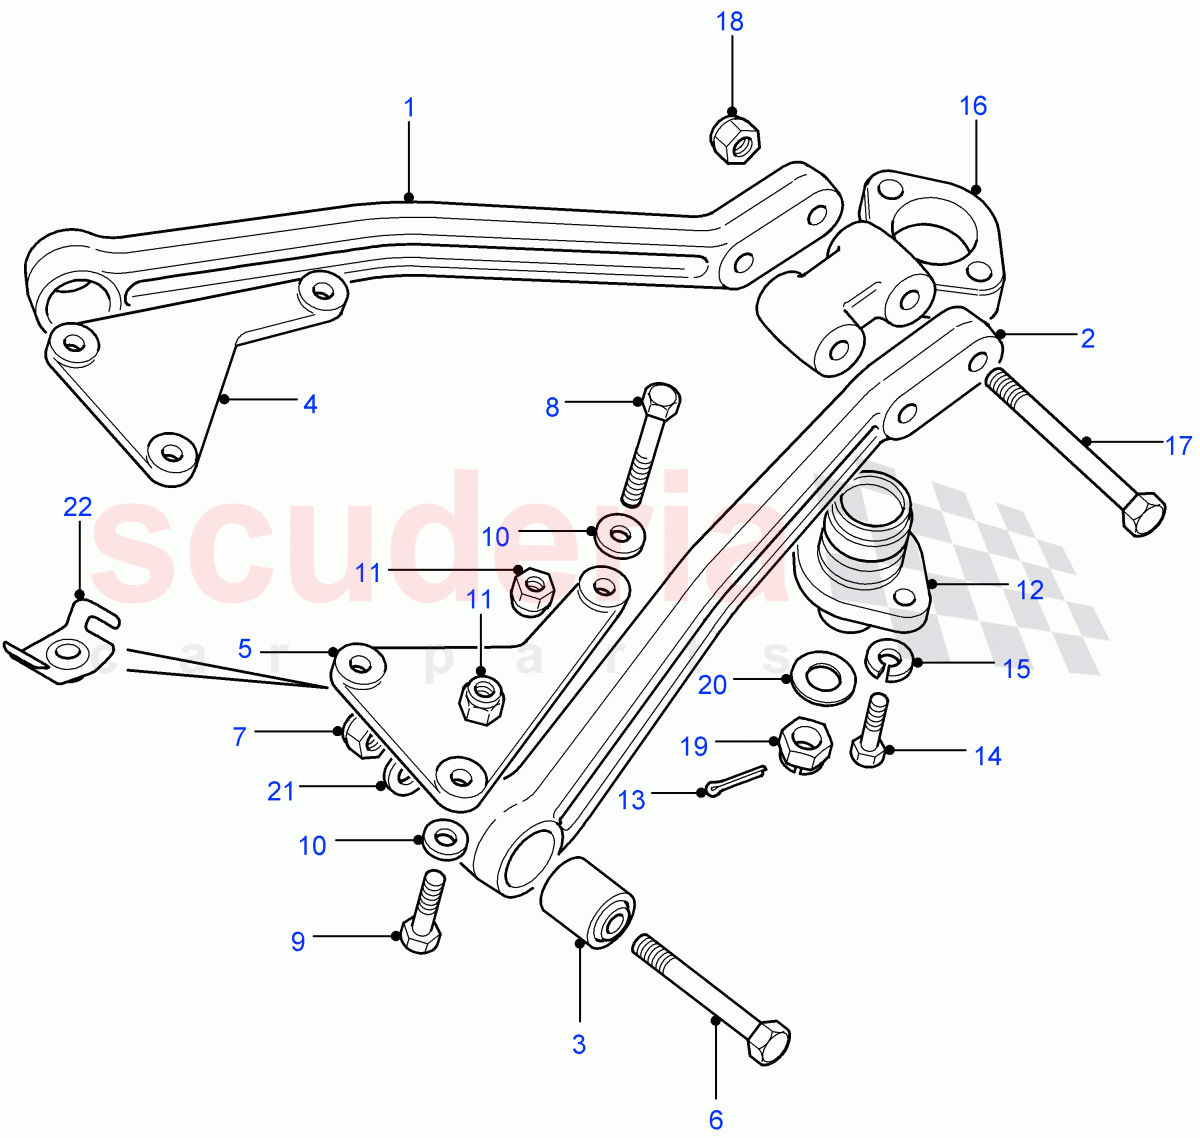 Top Link, Fulcrum & Ball Joint((V)FROM7A000001) of Land Rover Land Rover Defender (2007-2016)